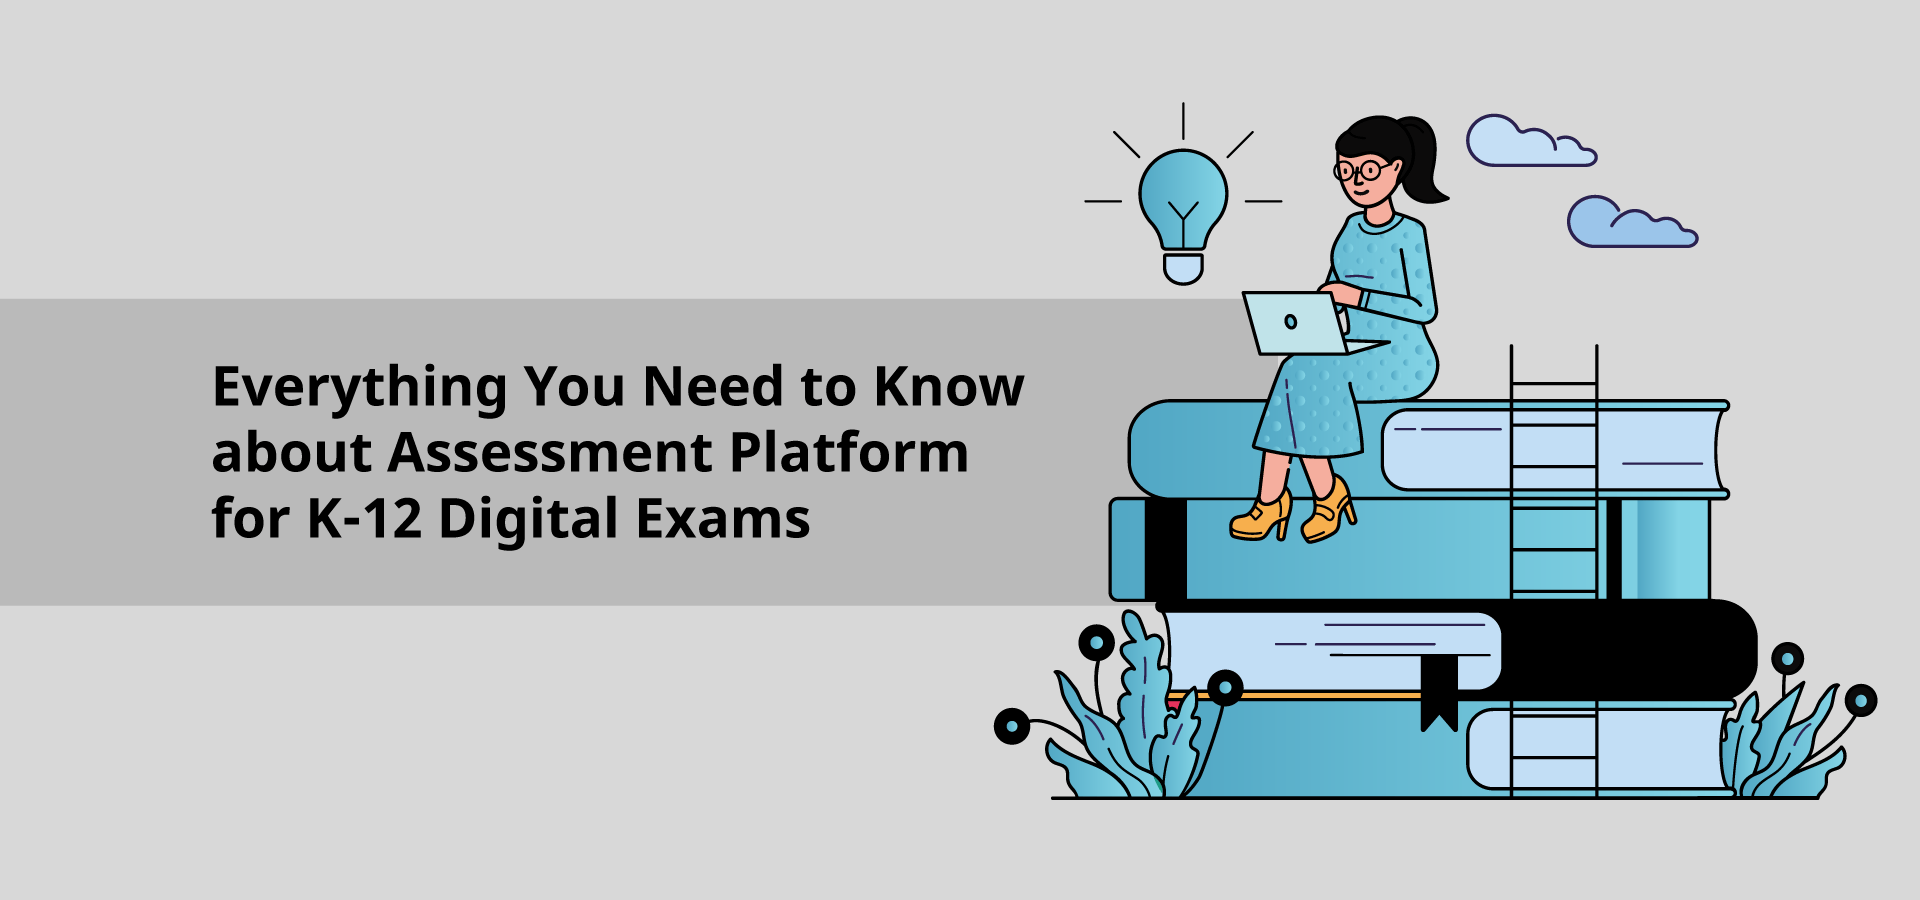 Everything You Need to Know about Assessment Platform for K-12 Digital Exams